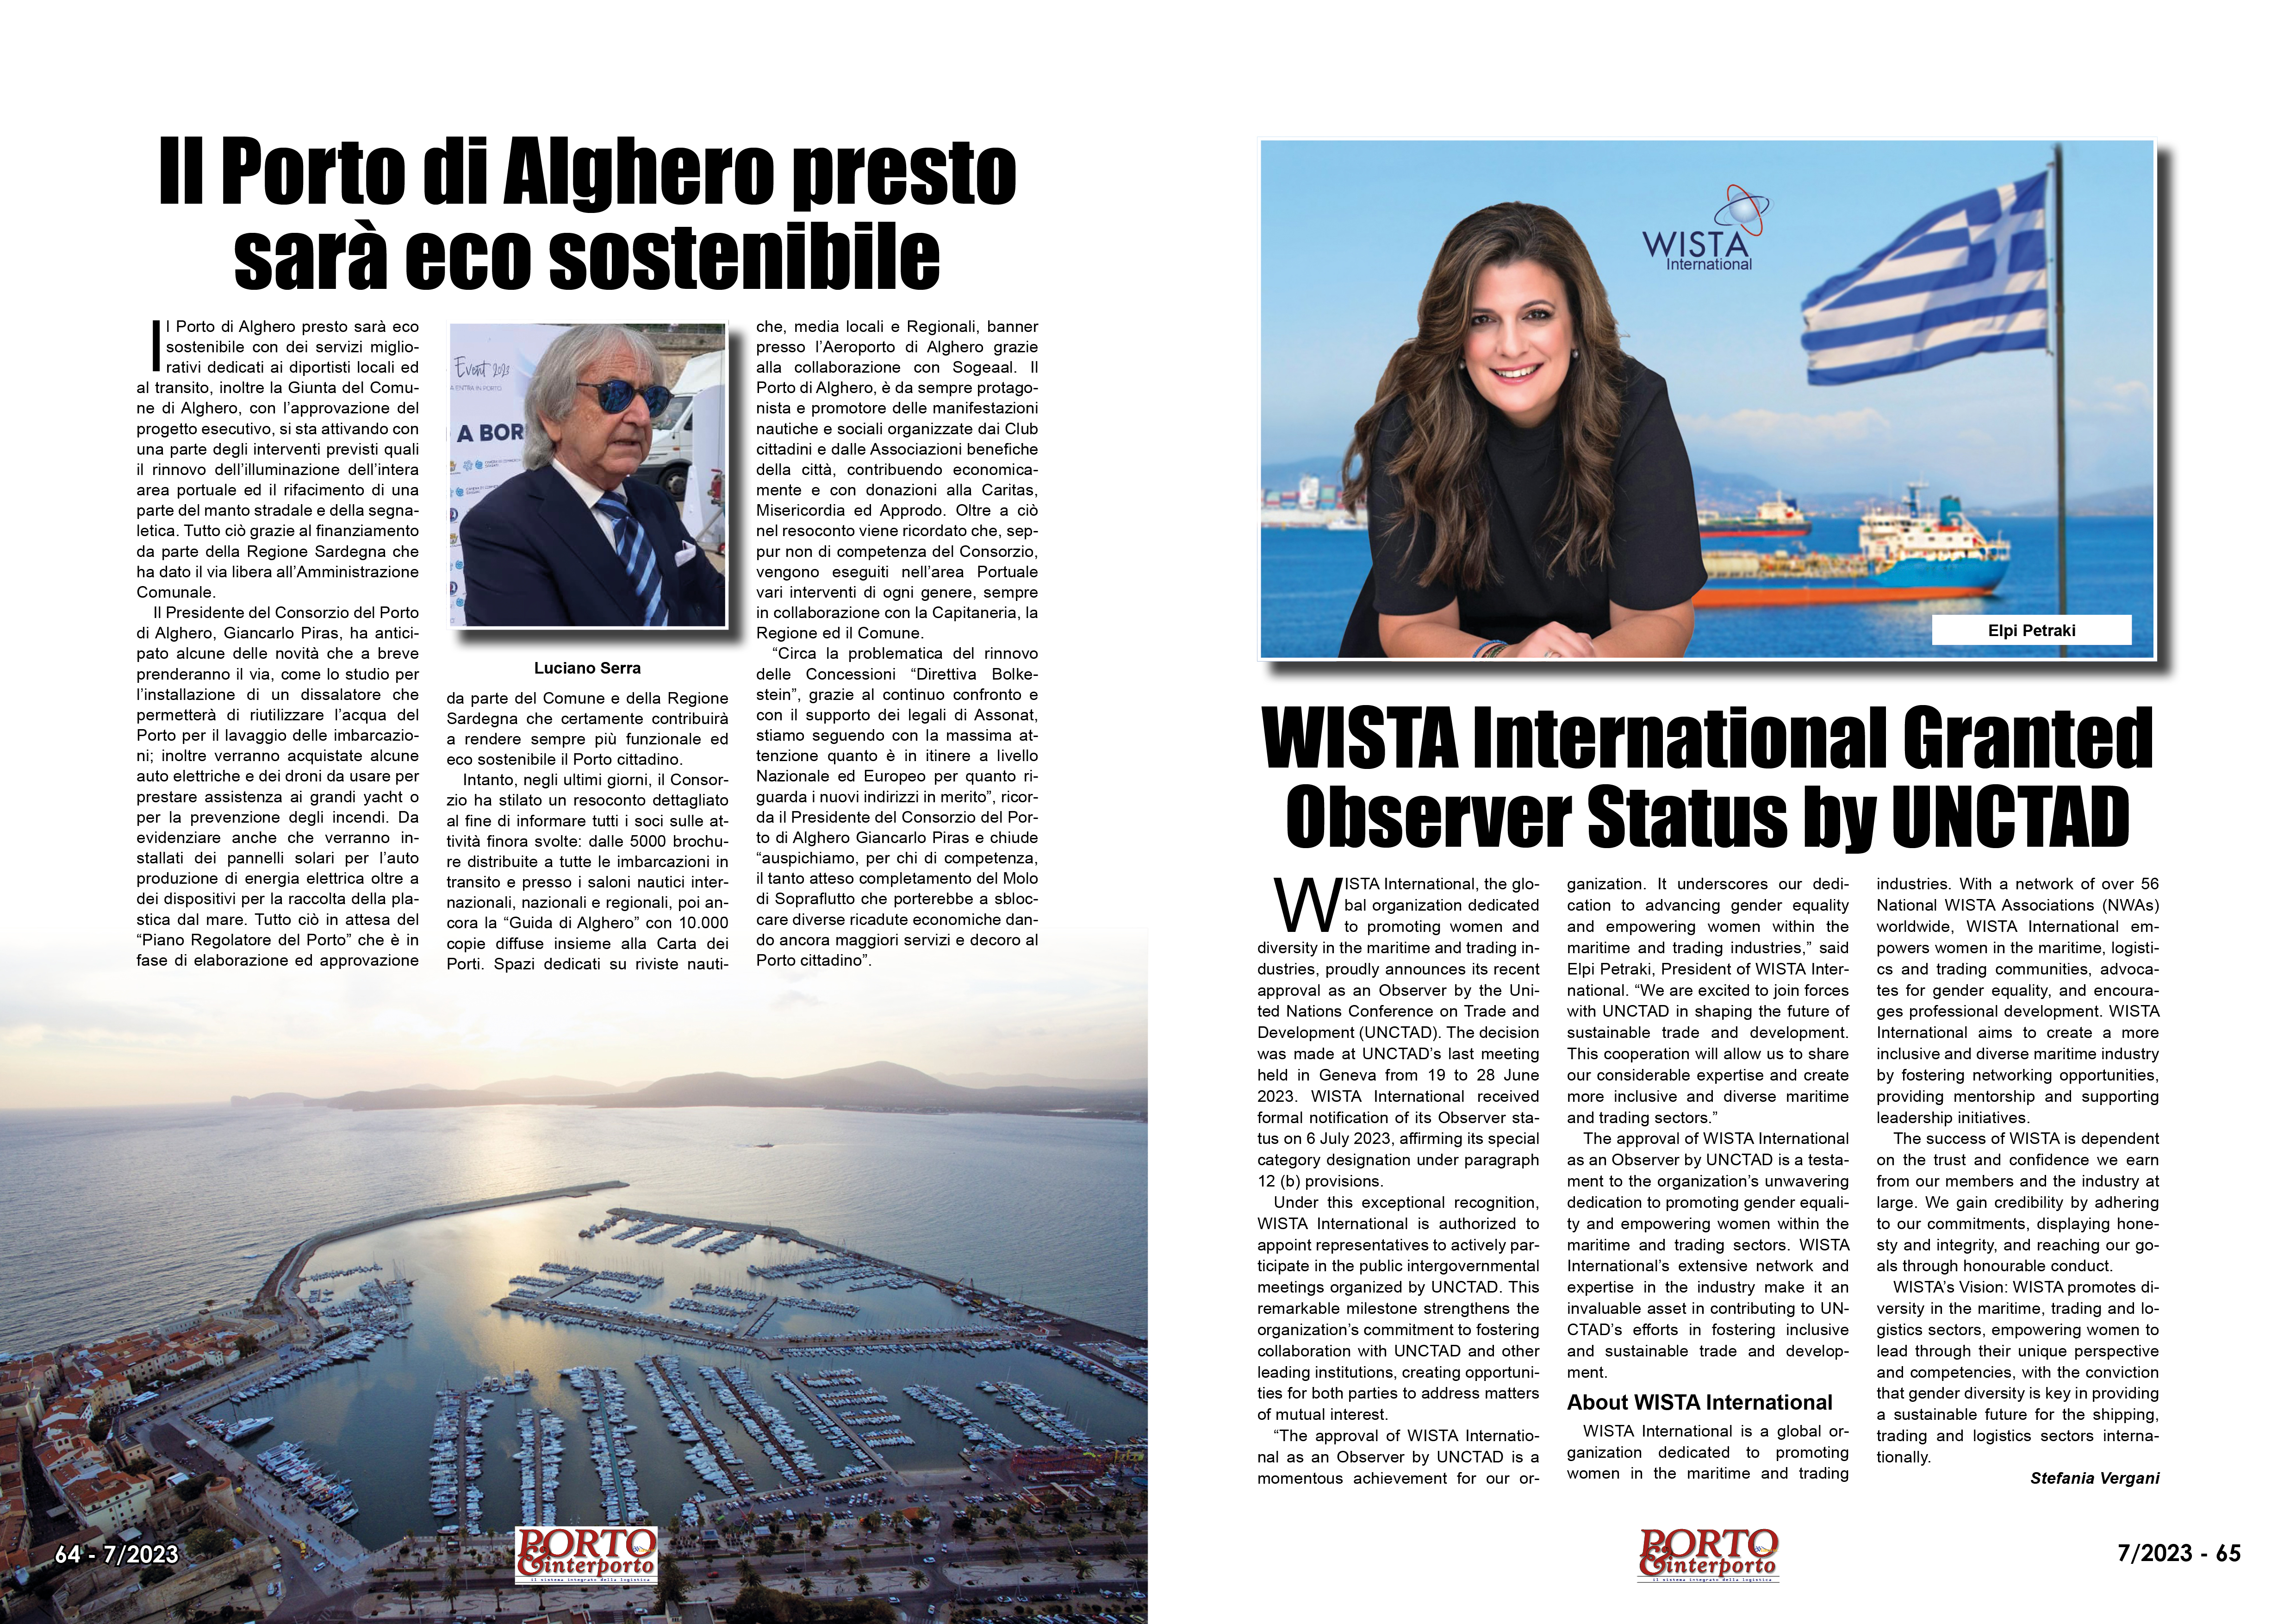 LUGLIO 2023 PAG. 65 - WISTA International Granted Observer Status by UNCTAD